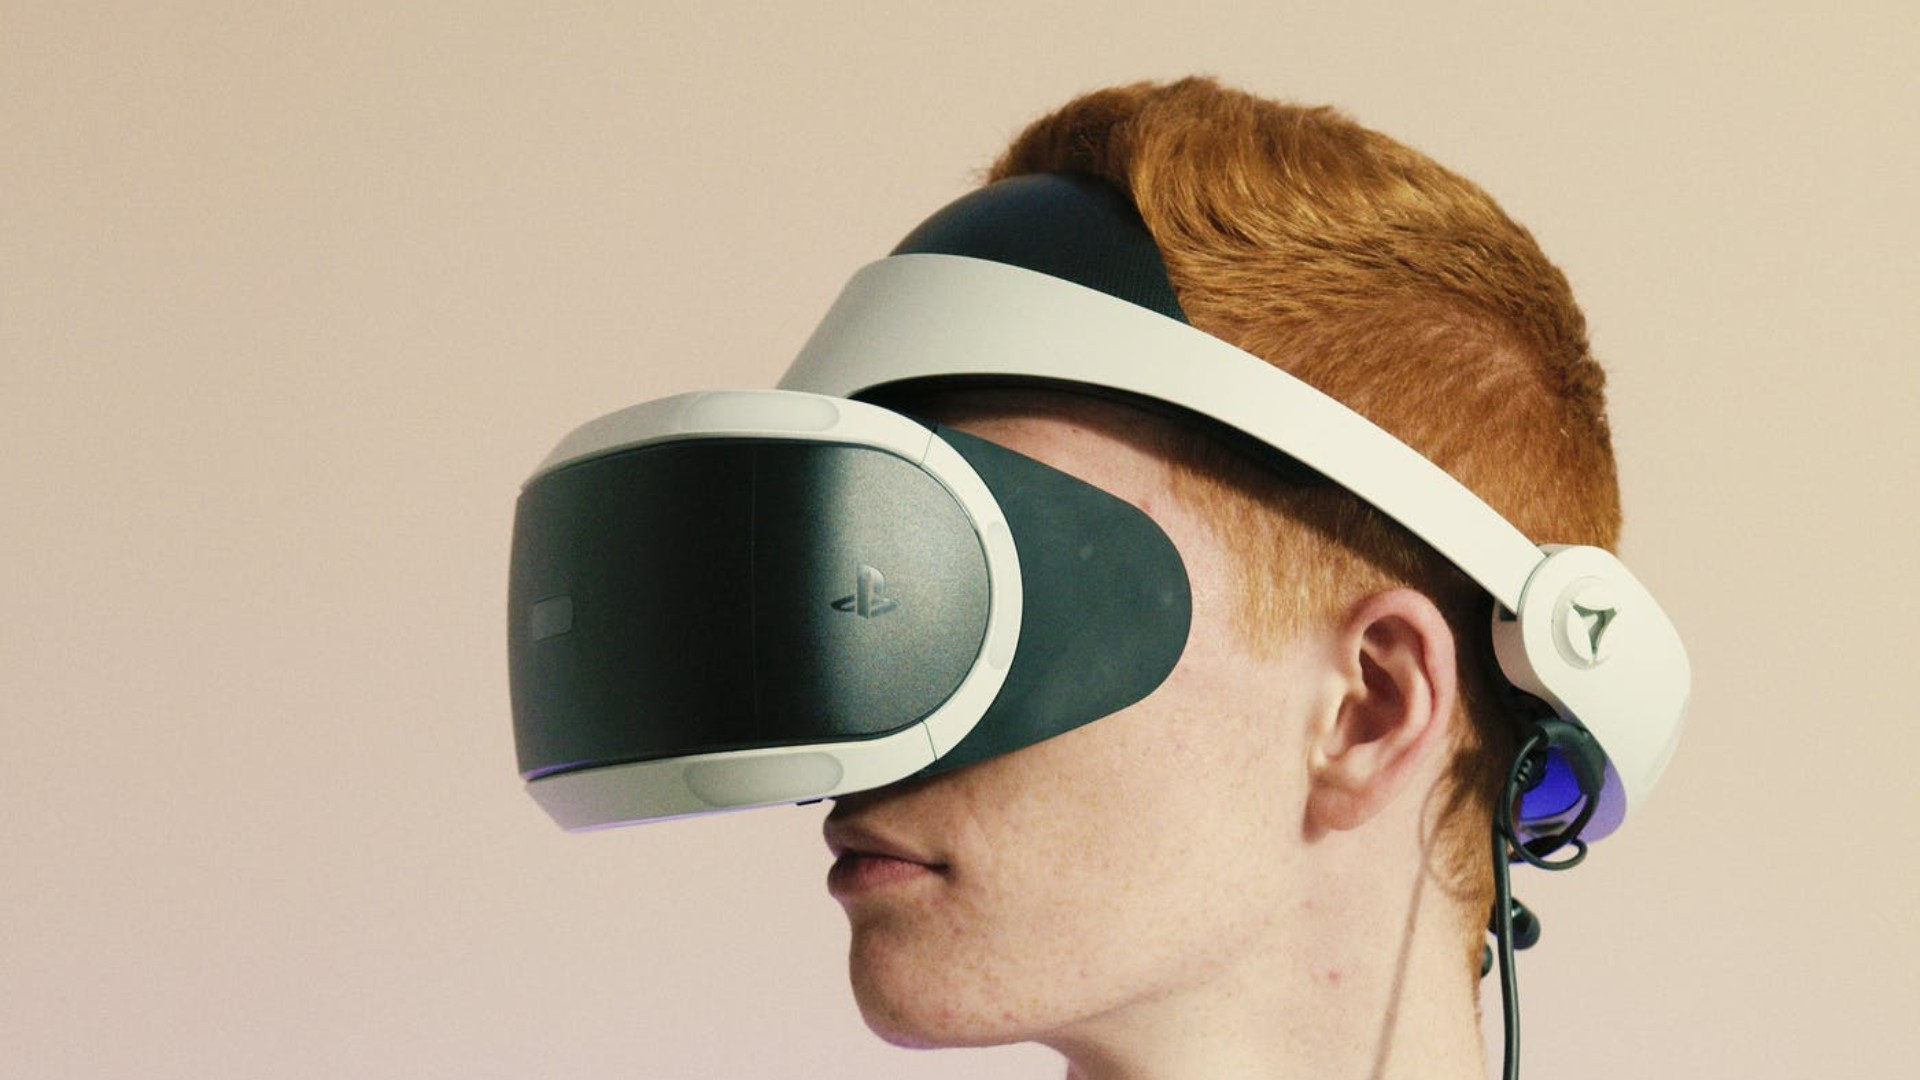 PlayStation VR 2: built-in cameras, wireless, ready for PS5